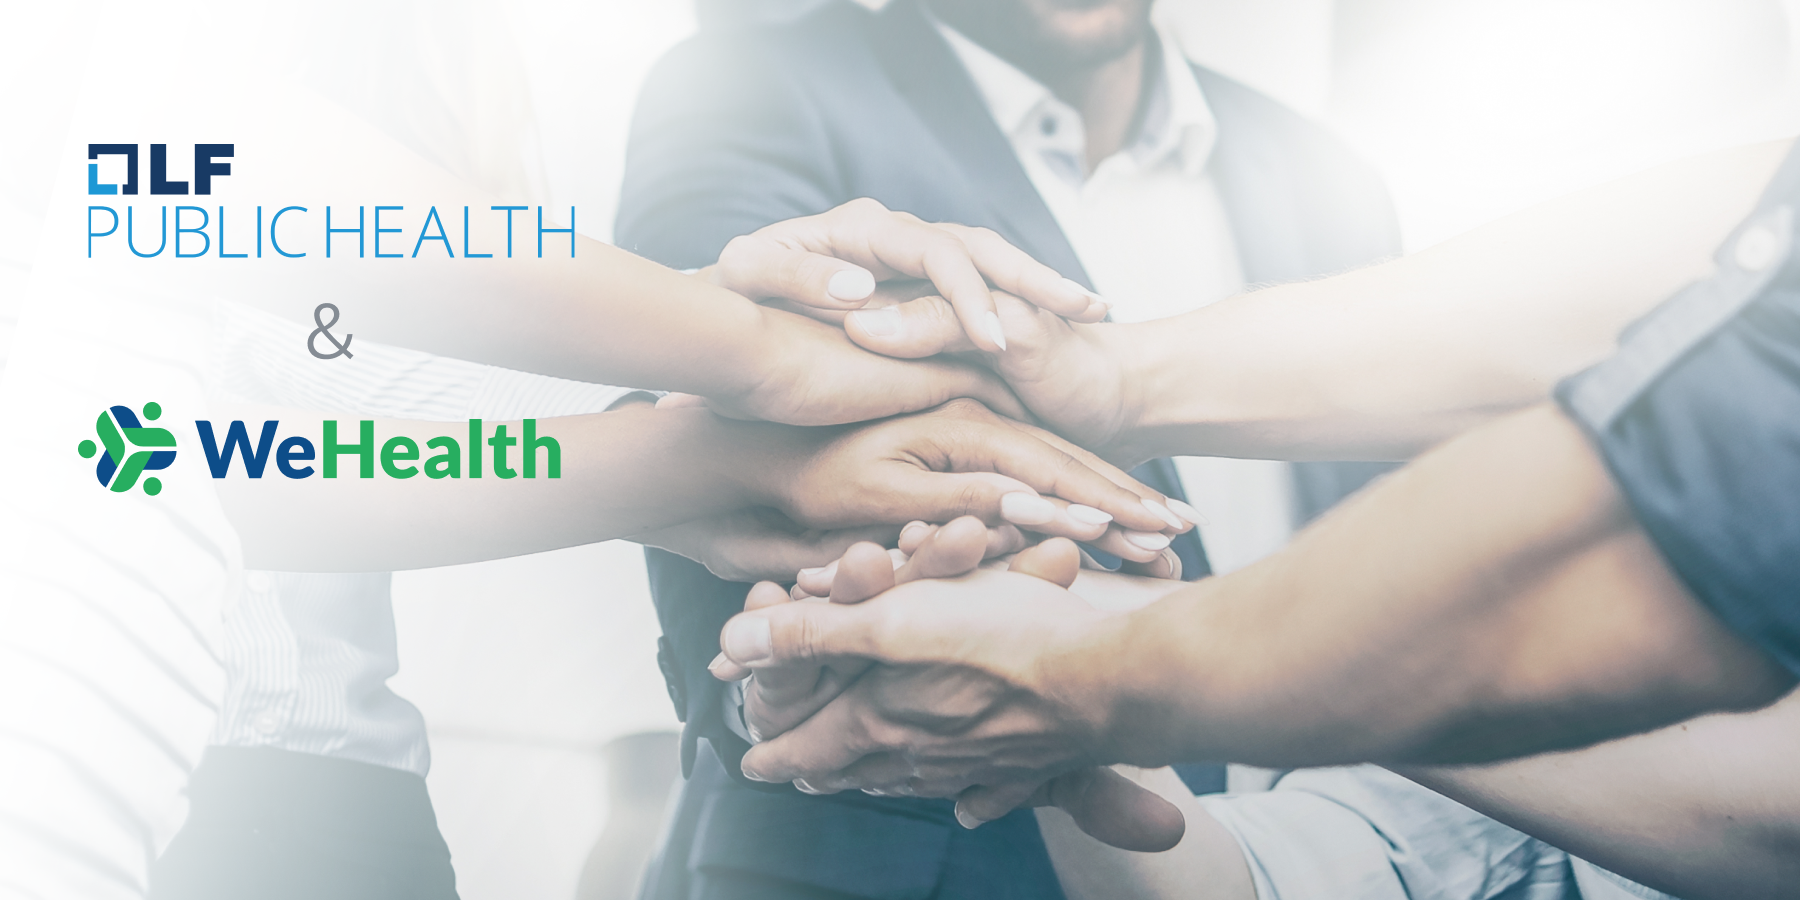 WeHealth Becomes an LFPH Founding Member